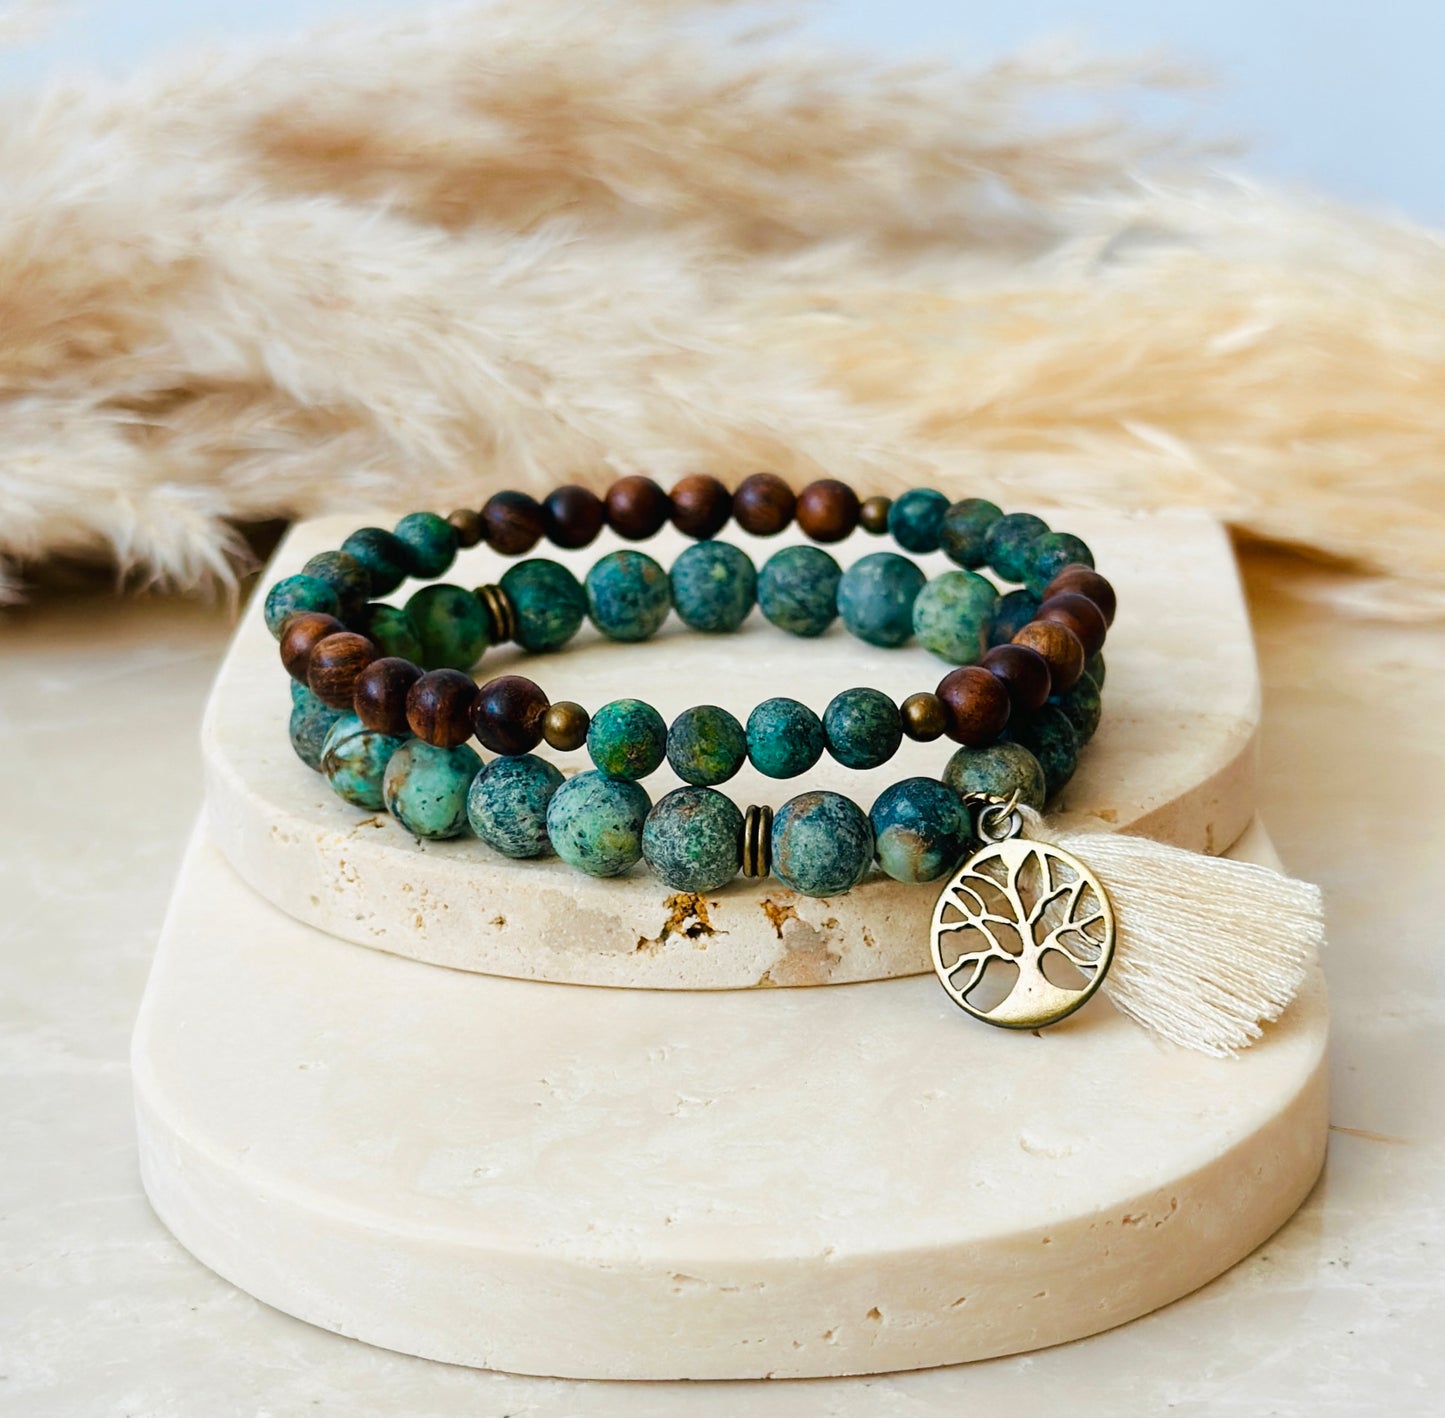 The African Turquoise Stack